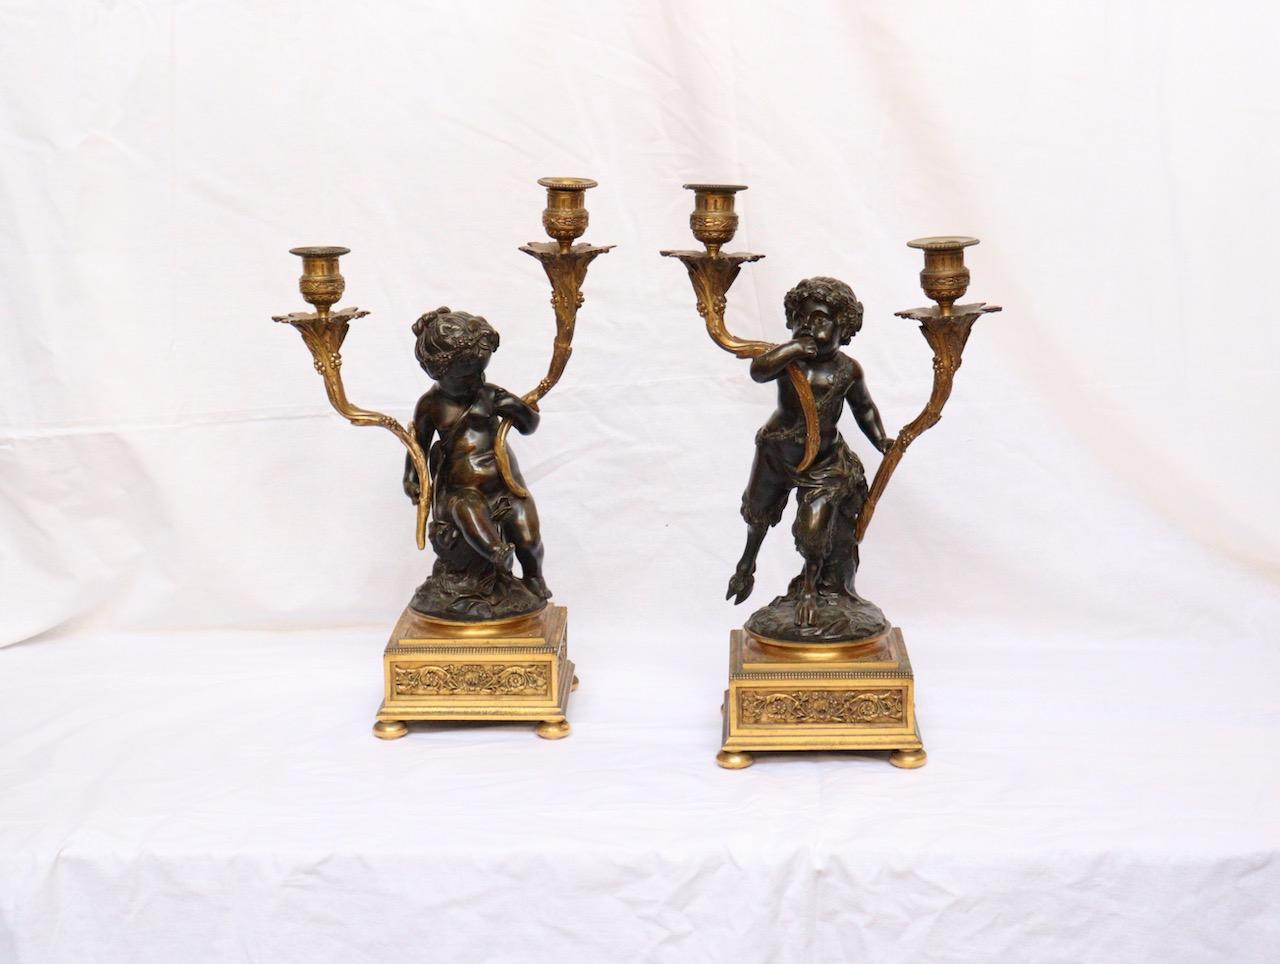 A French 19th century pair of Faune and Bacchus candelabras
Two lights sprouting from sheaves of foliage held by patinated bronze figures of a Faune and Bacchus on ormolu square base.
Louis XVI style,
circa 1880.
After Claude Michel Clodion.